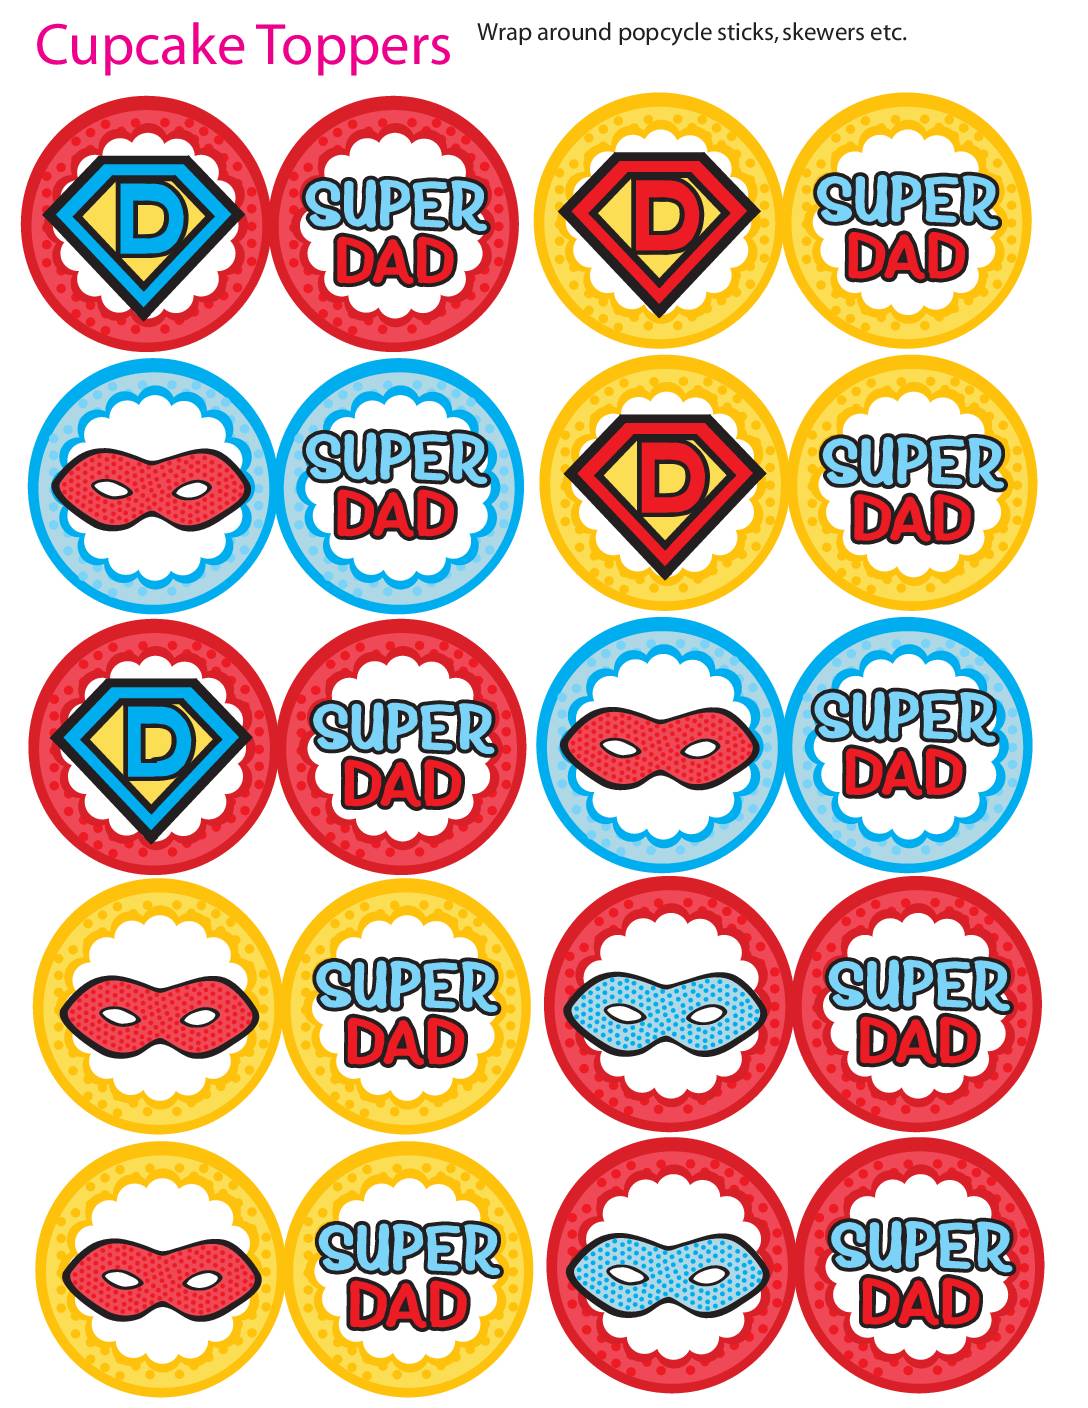 Cupcake Toppers Super Dad